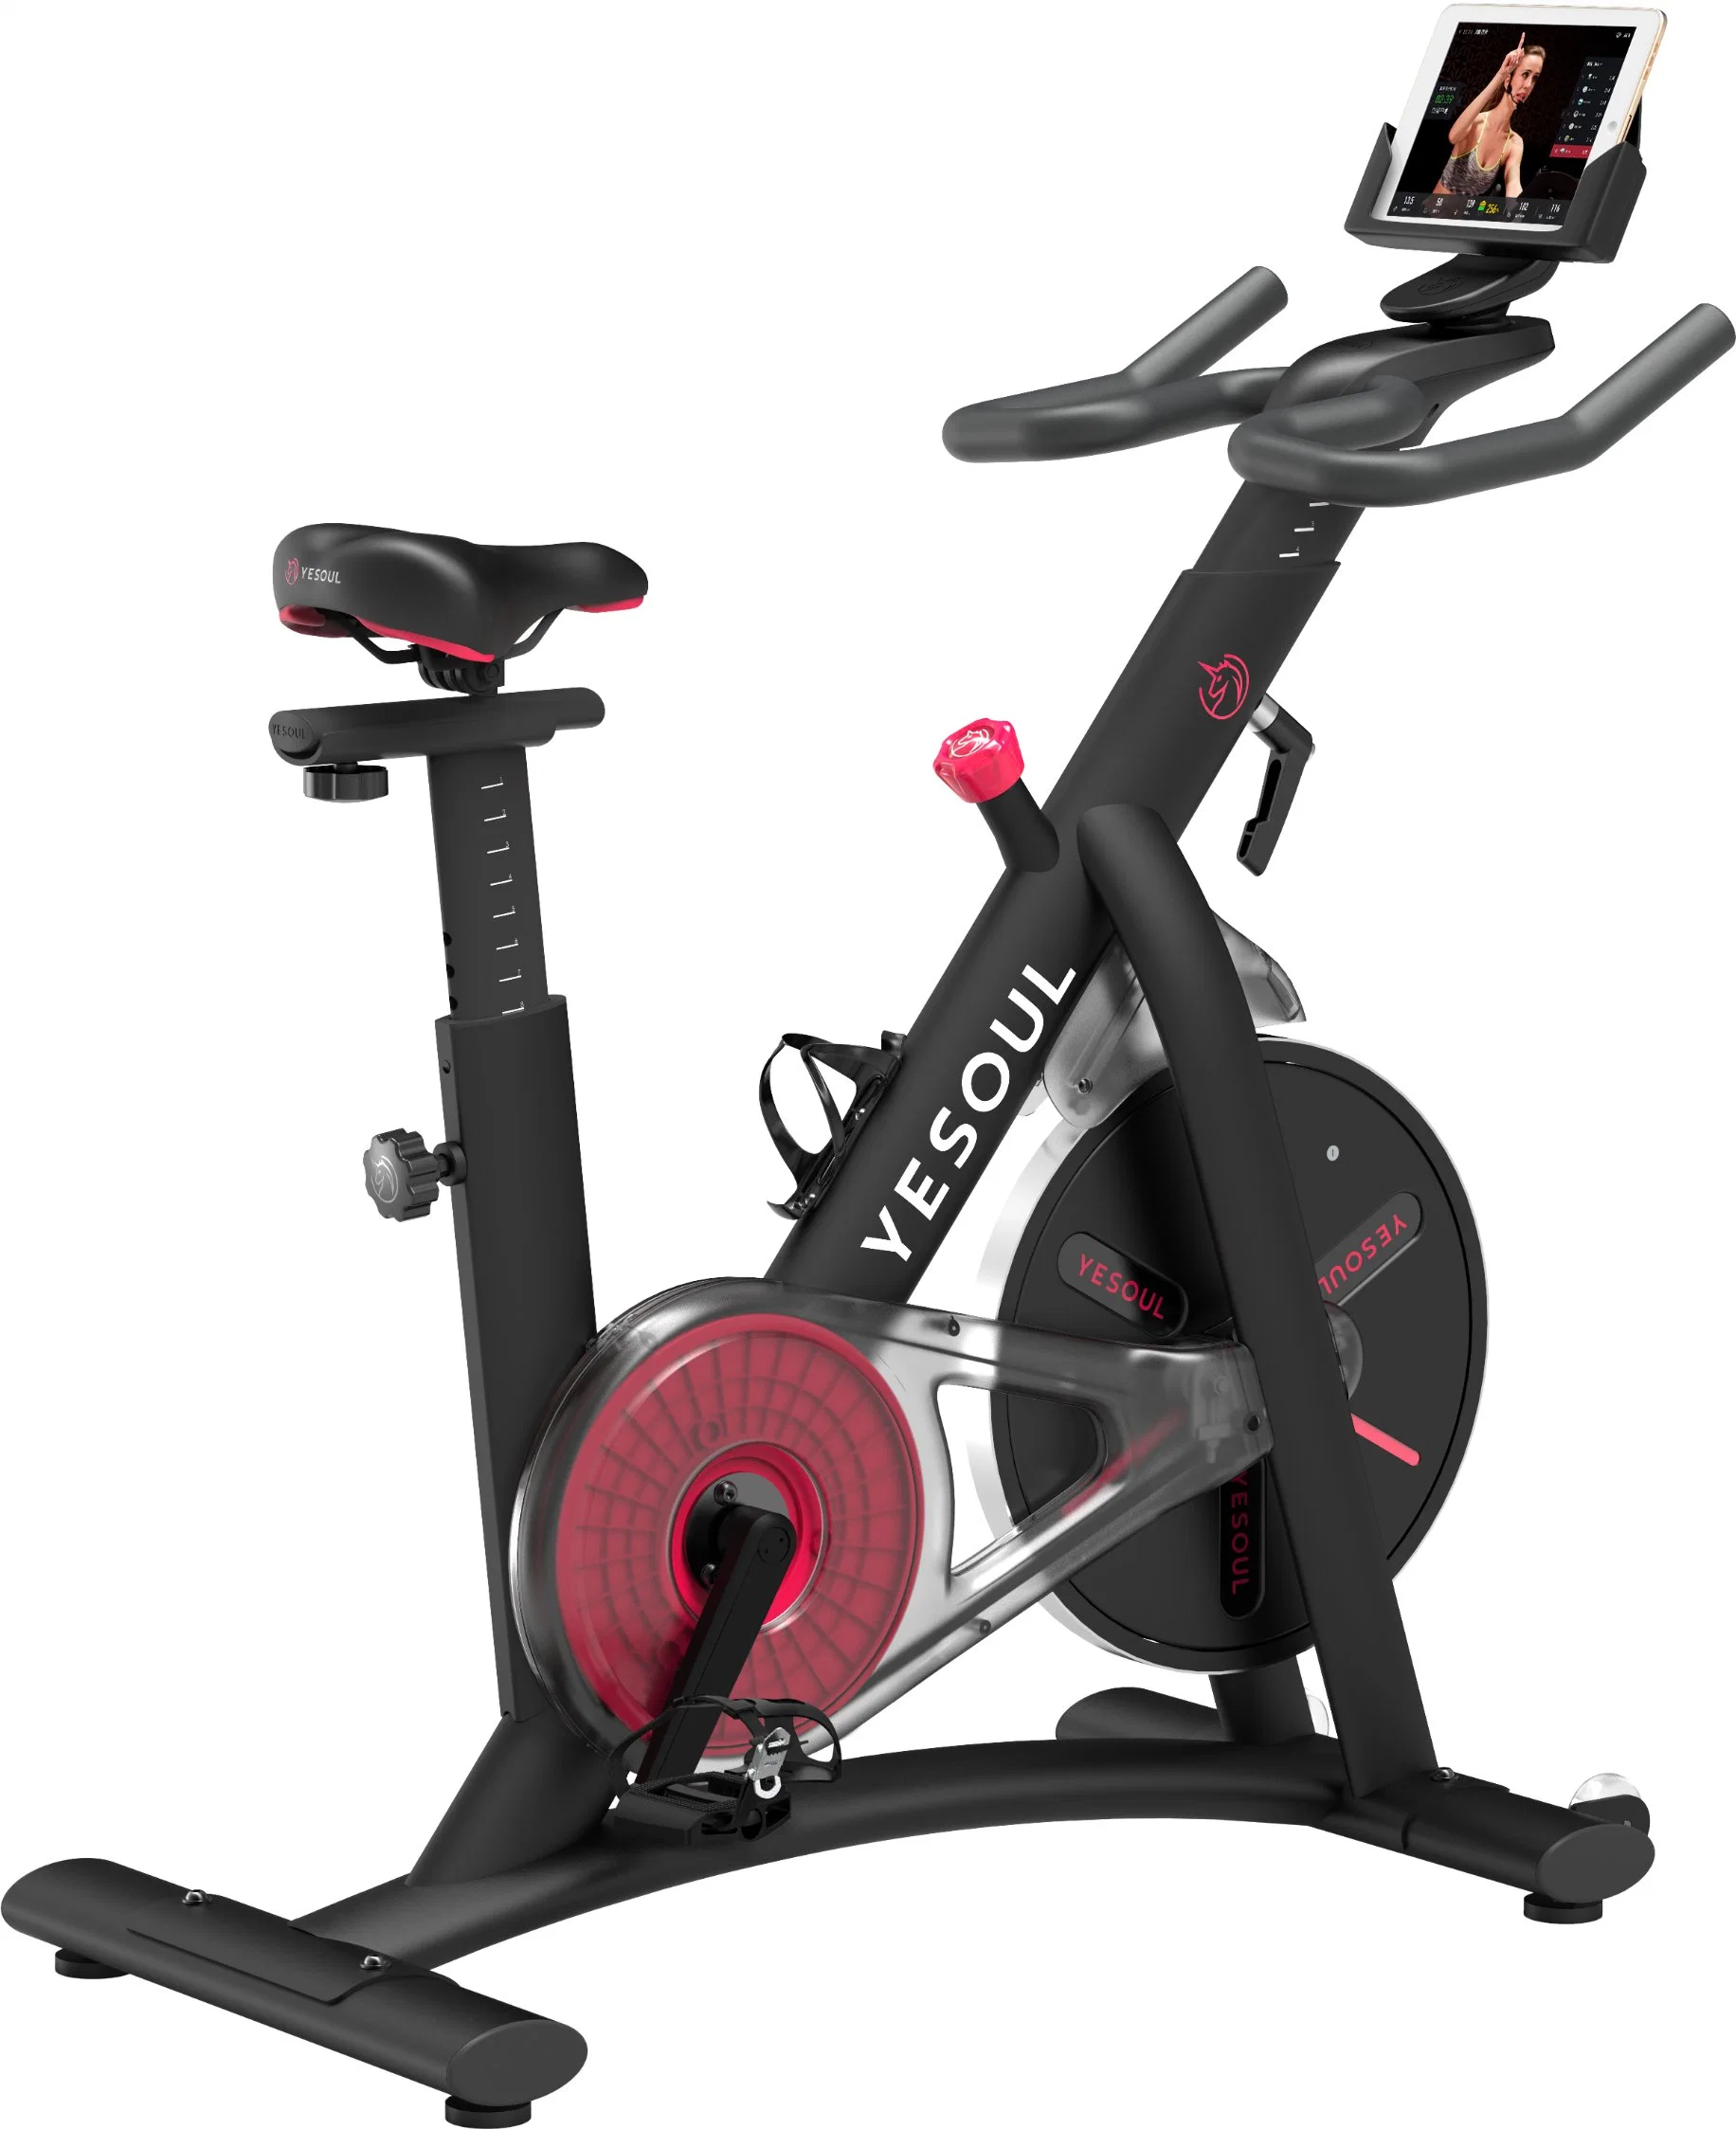 Home Fitness Spin Bike/Commercial Indoor Training Home Gym Fitness Equipment/Exercise Machine Magnetic Spinning Exercise Bikes/Sports Bike/Stationary Bike